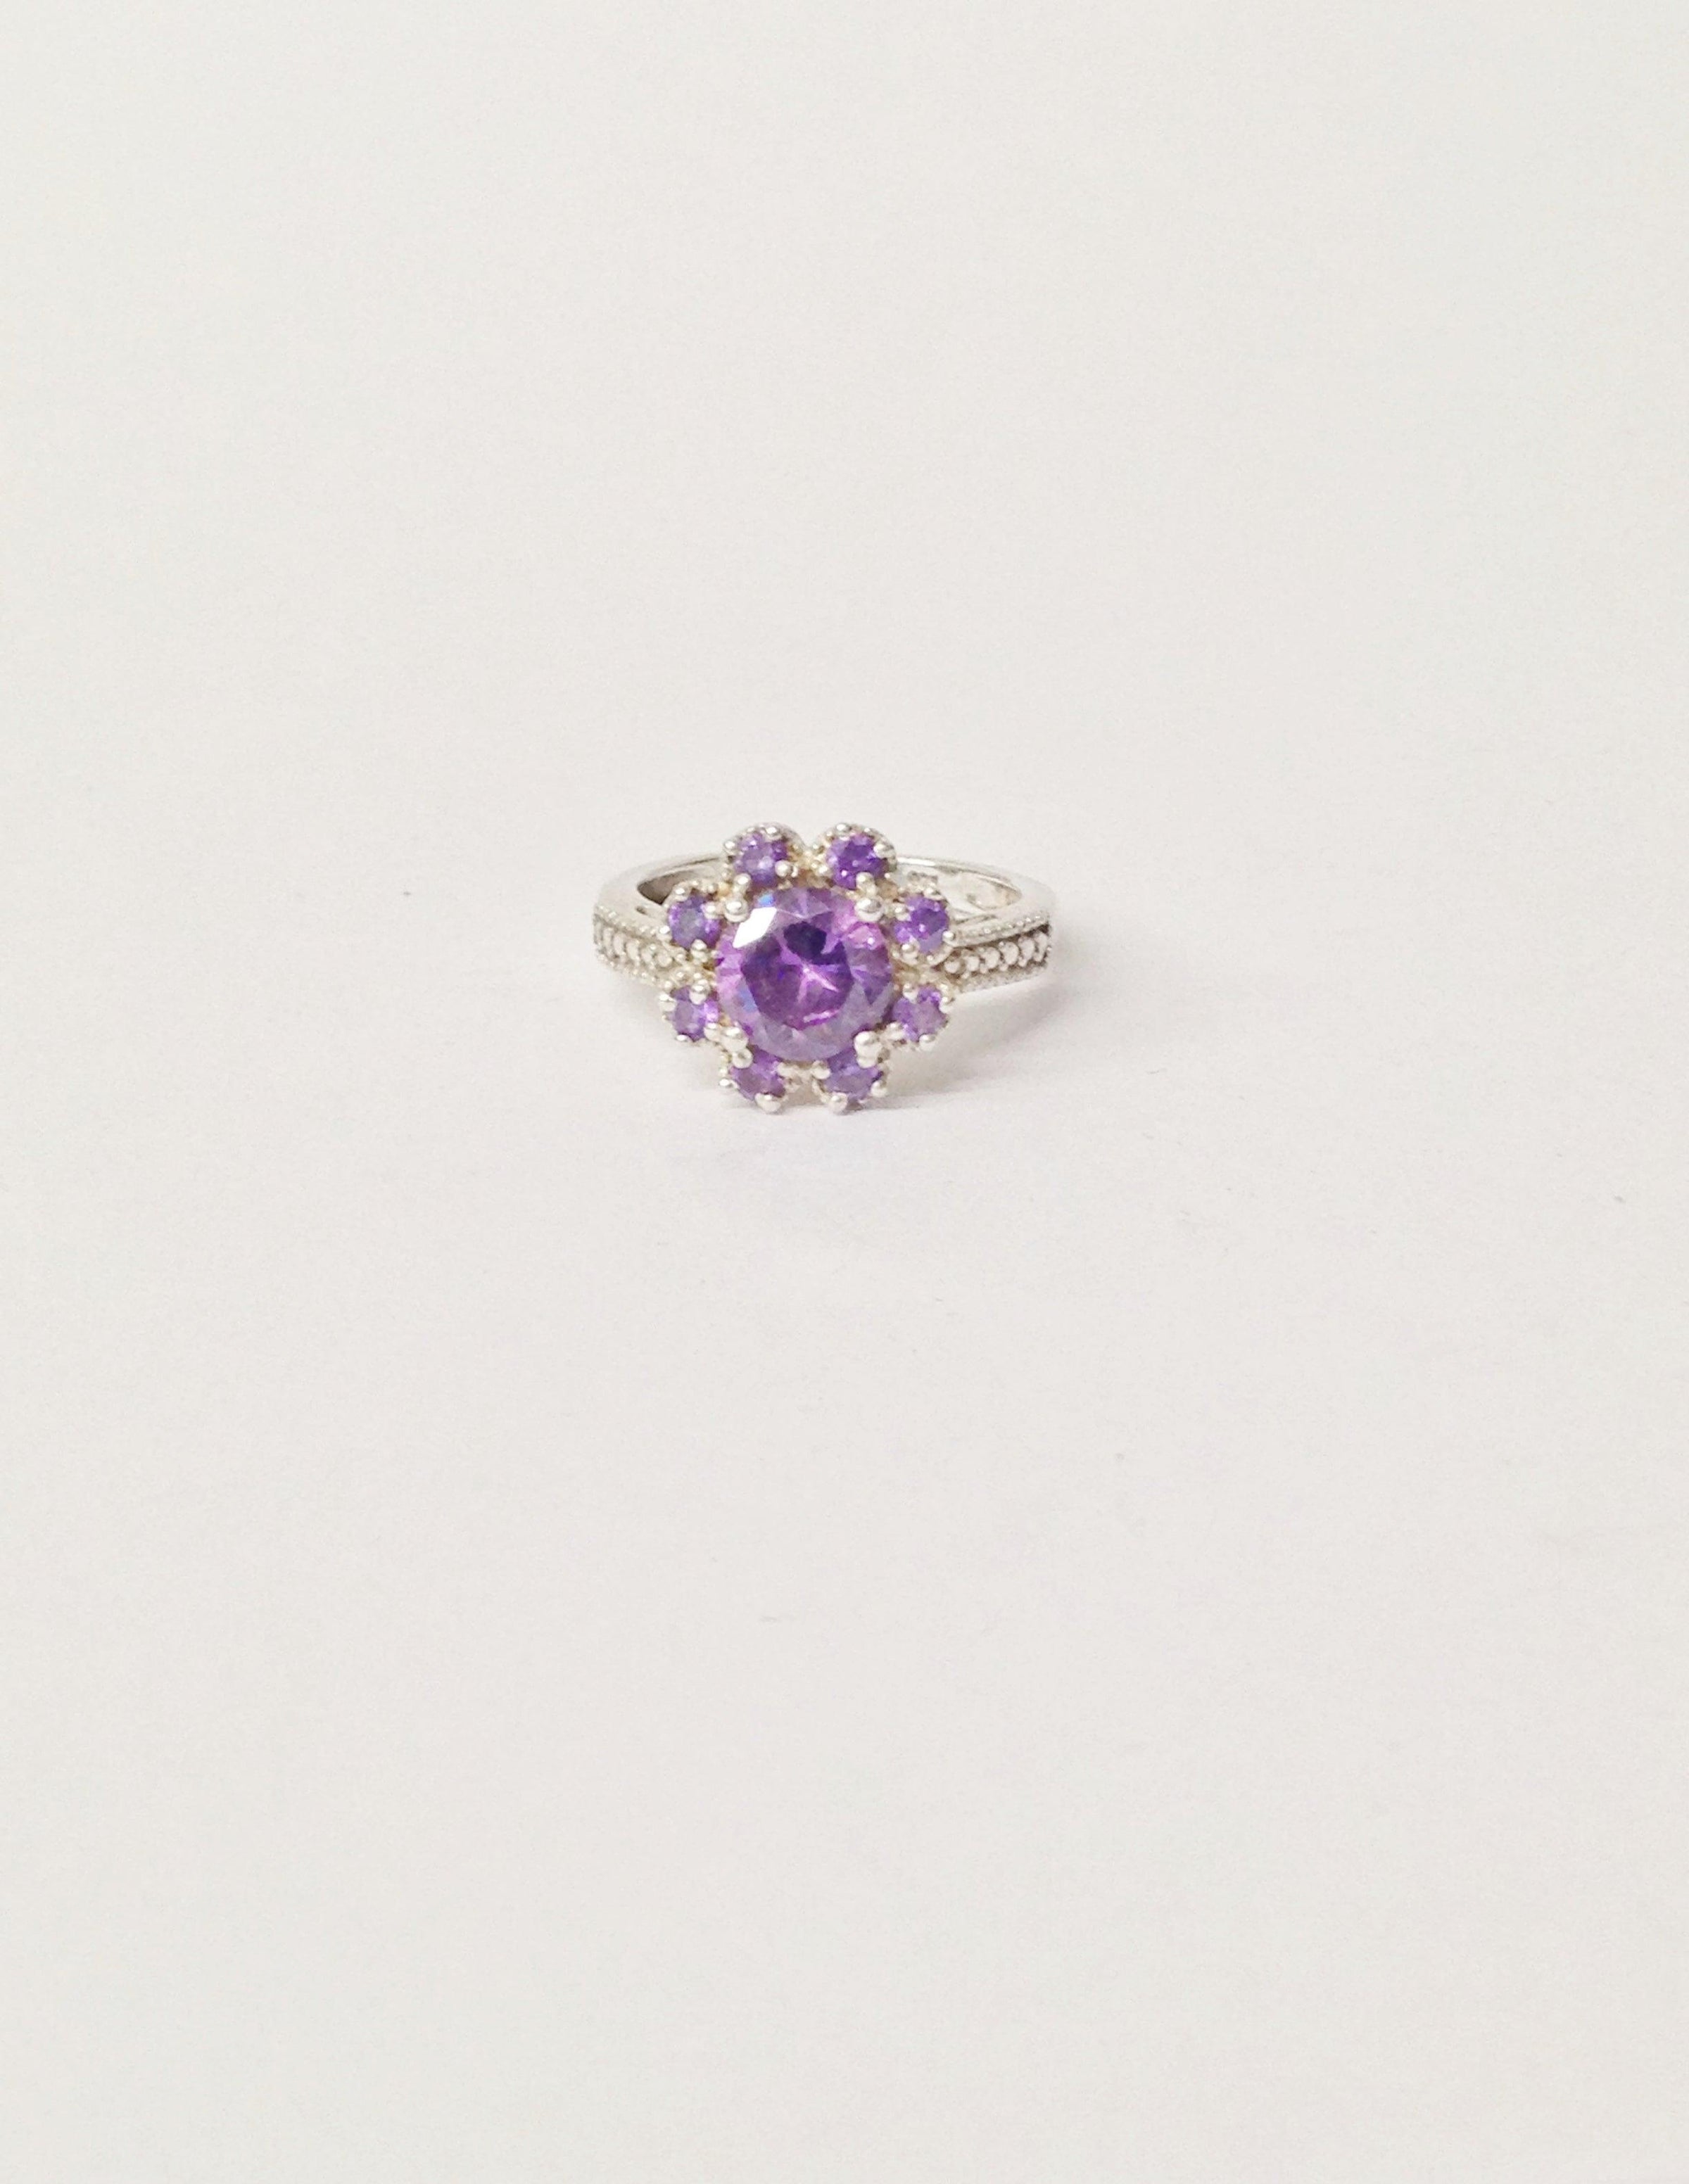 Sterling Silver Purple CZ Cubic Zirconia Flower Ring - Hers and His Treasures